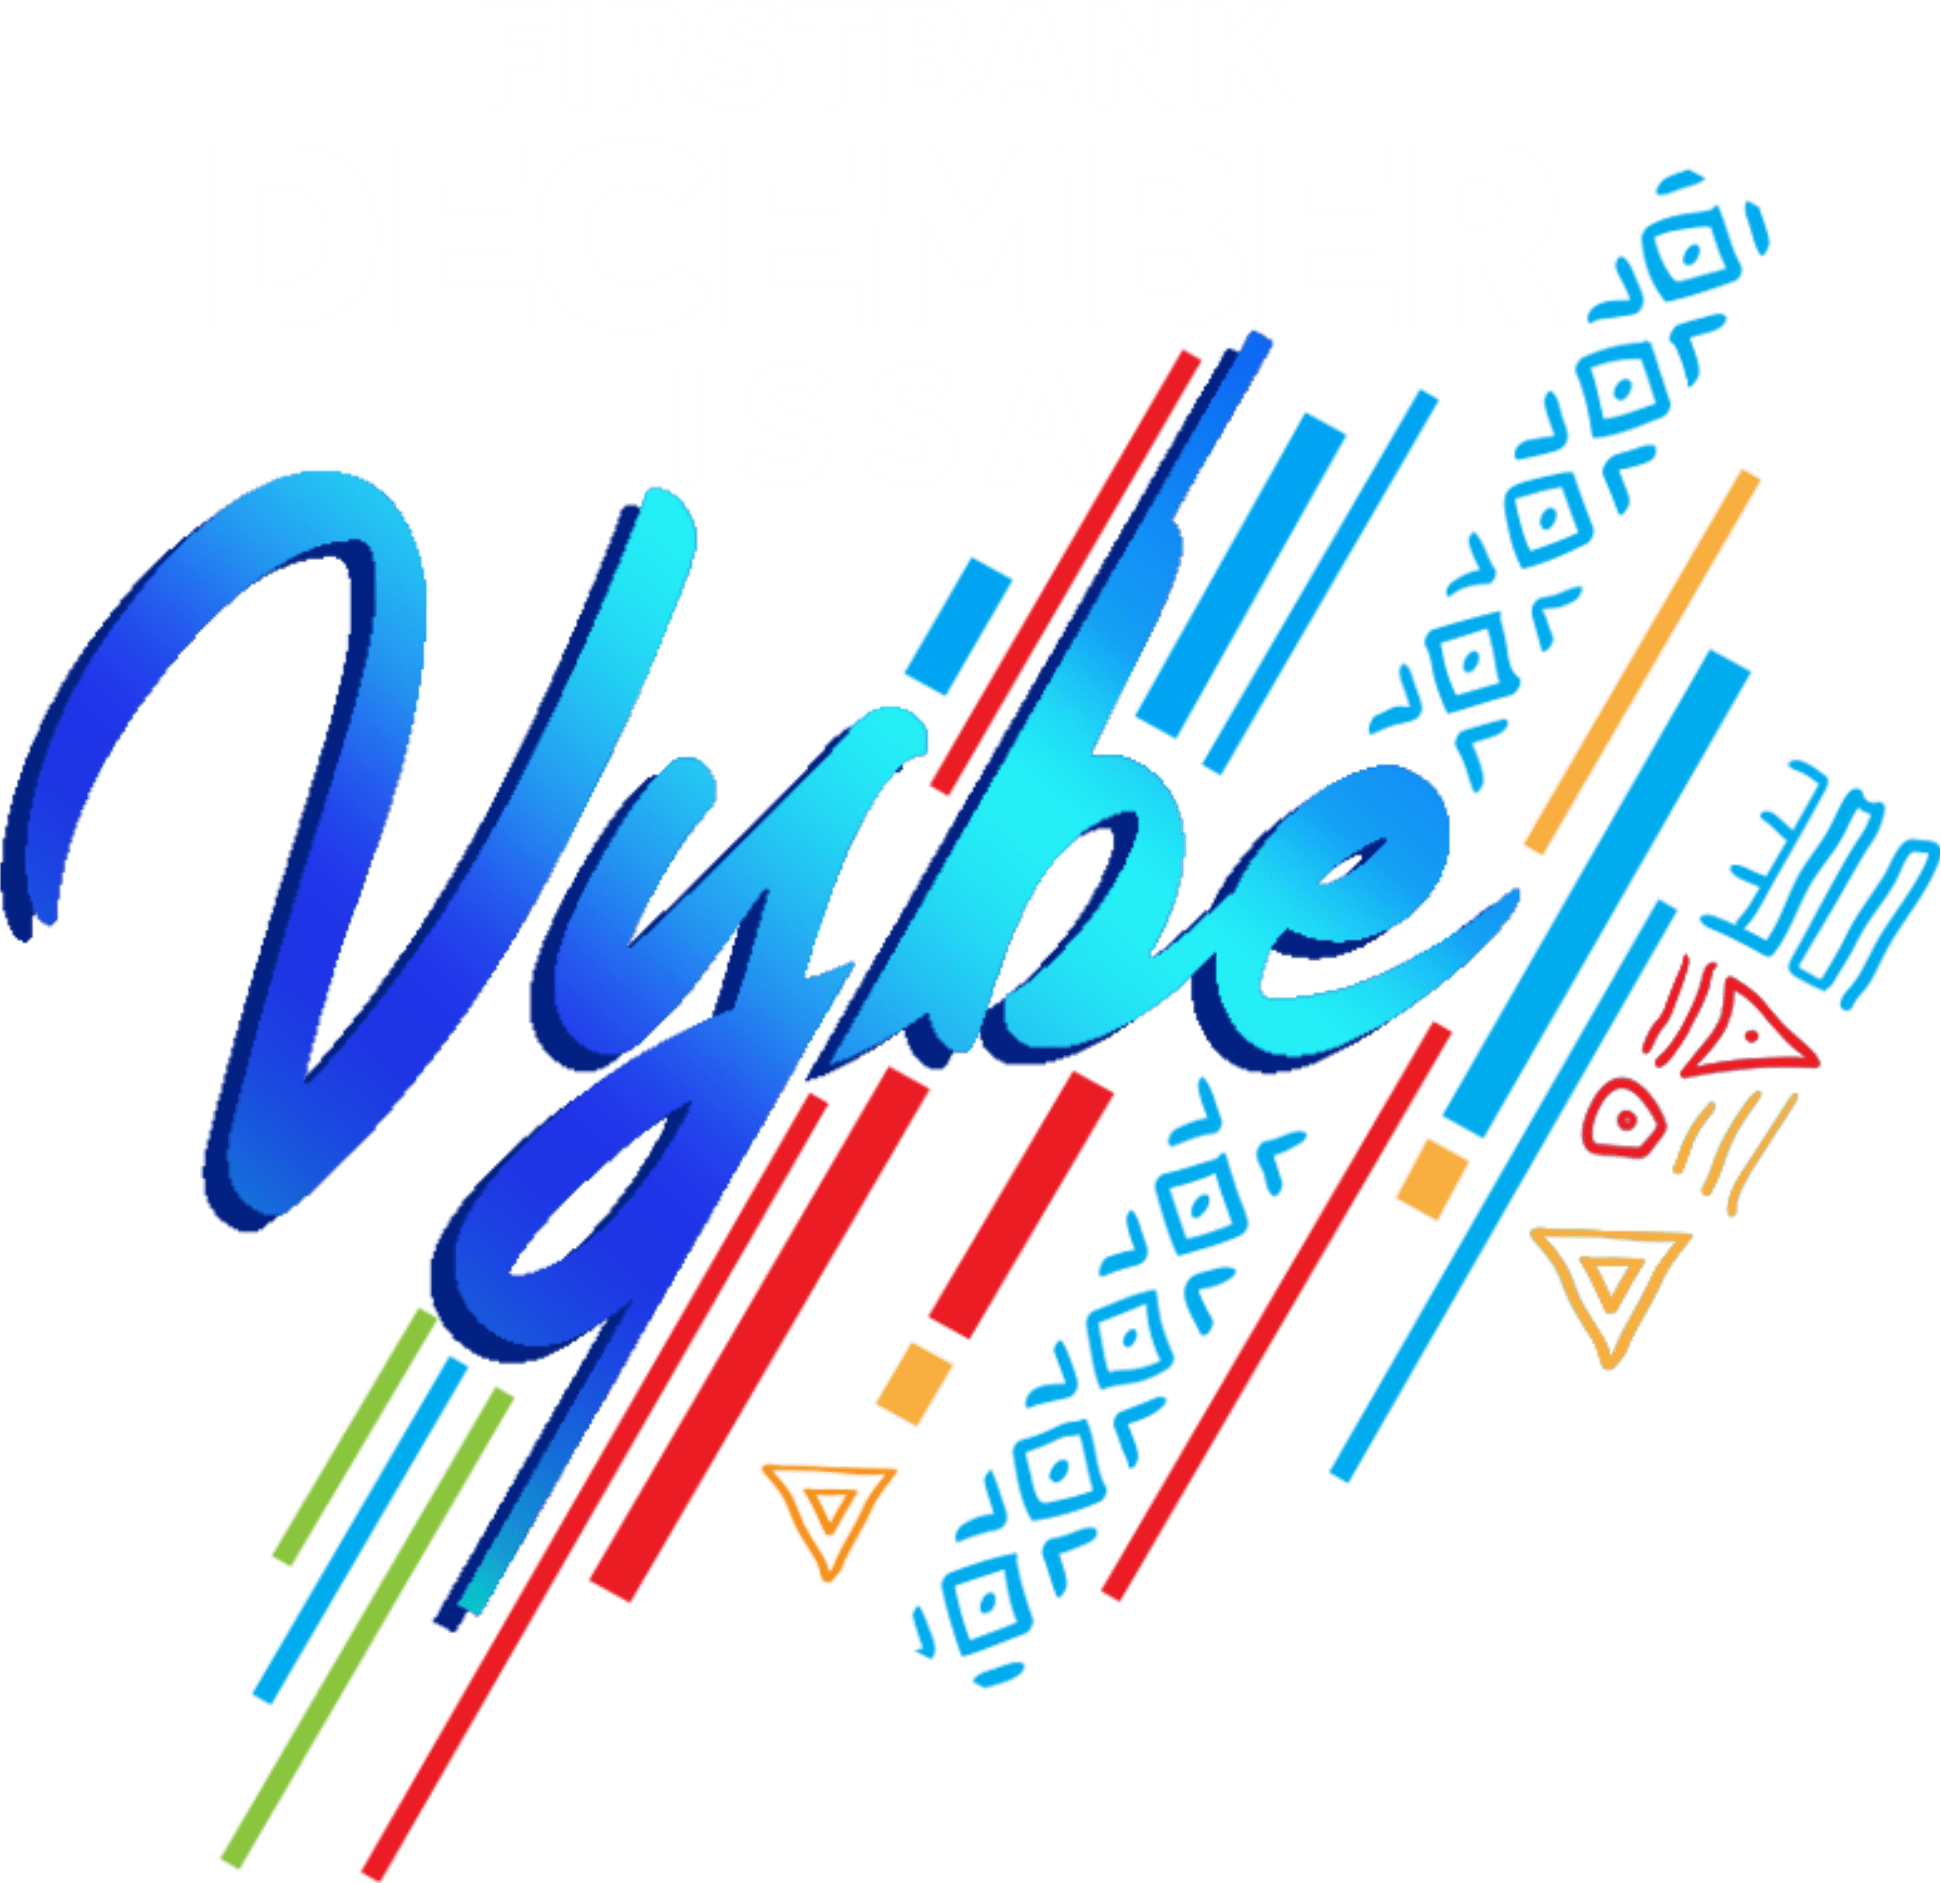 DecemberIssaVybe by First Bank